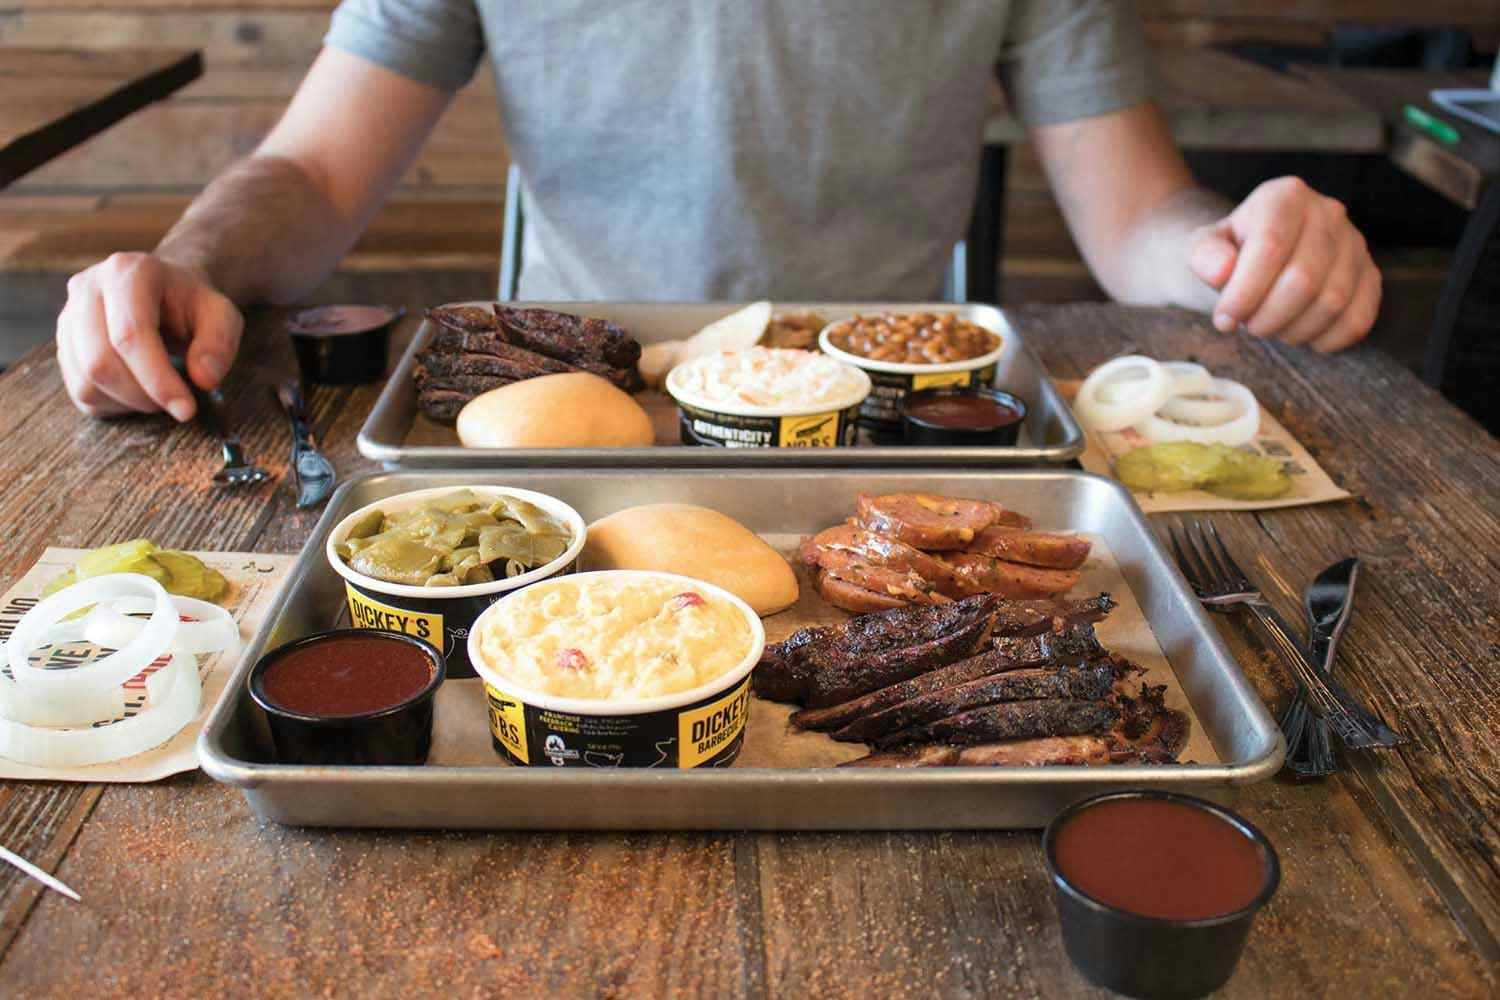 Franchising.com: Local Franchisee Brings Dickey's Barbecue Pit to Lutz